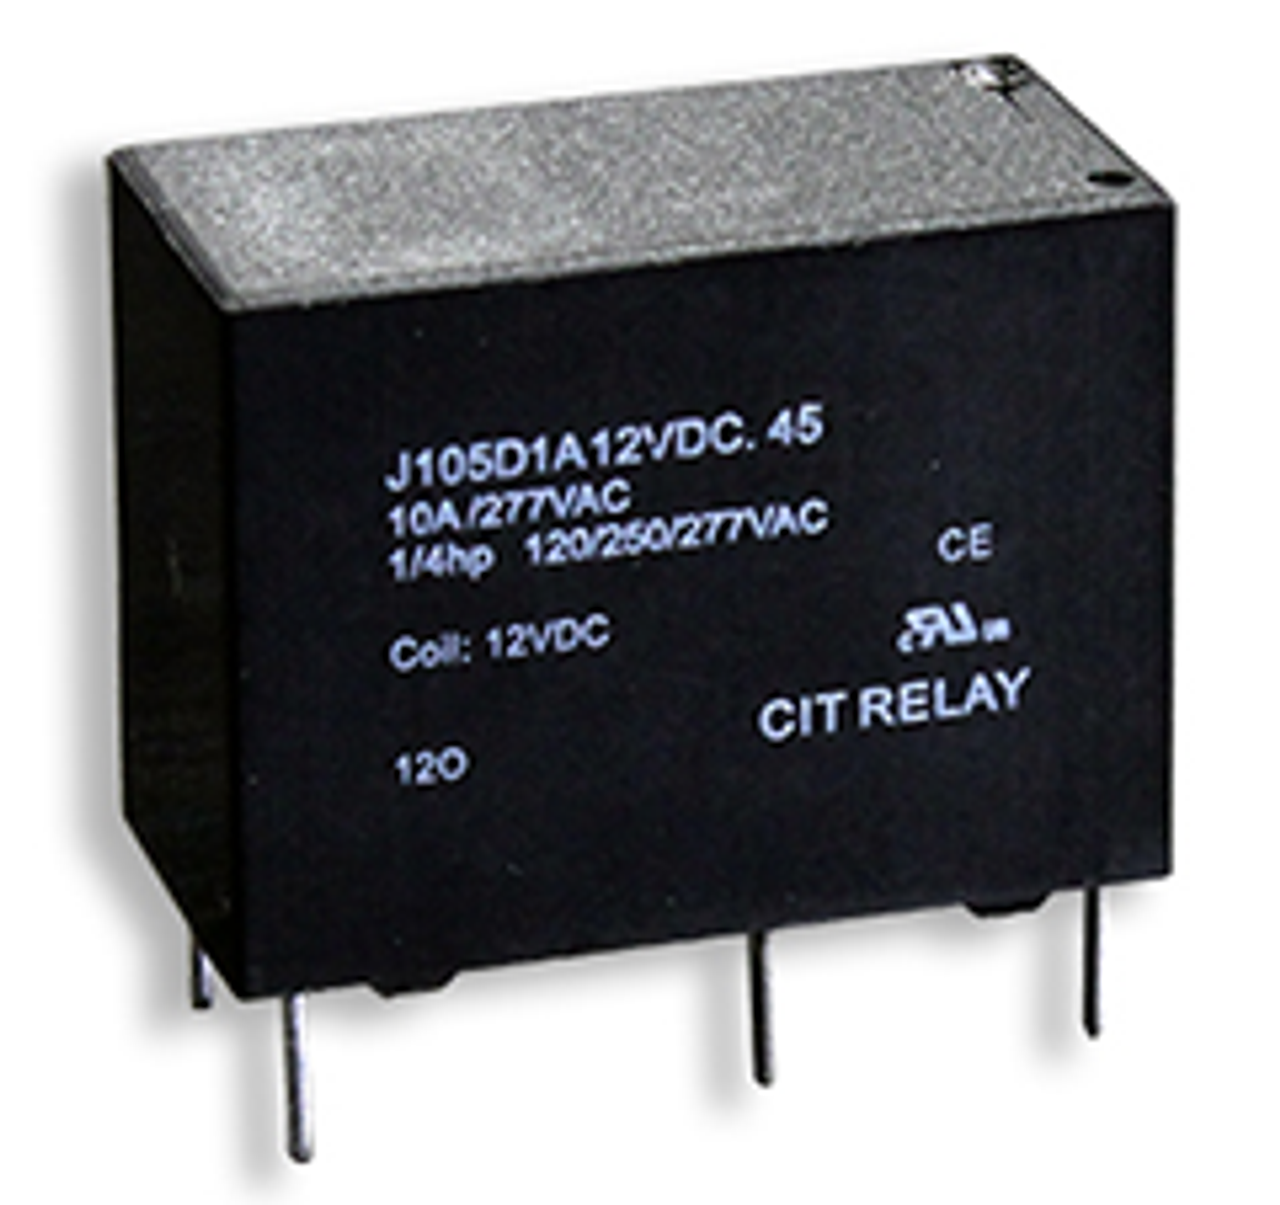 CIT Relay and Switch J105D1AS12VDC.20 Power Relays